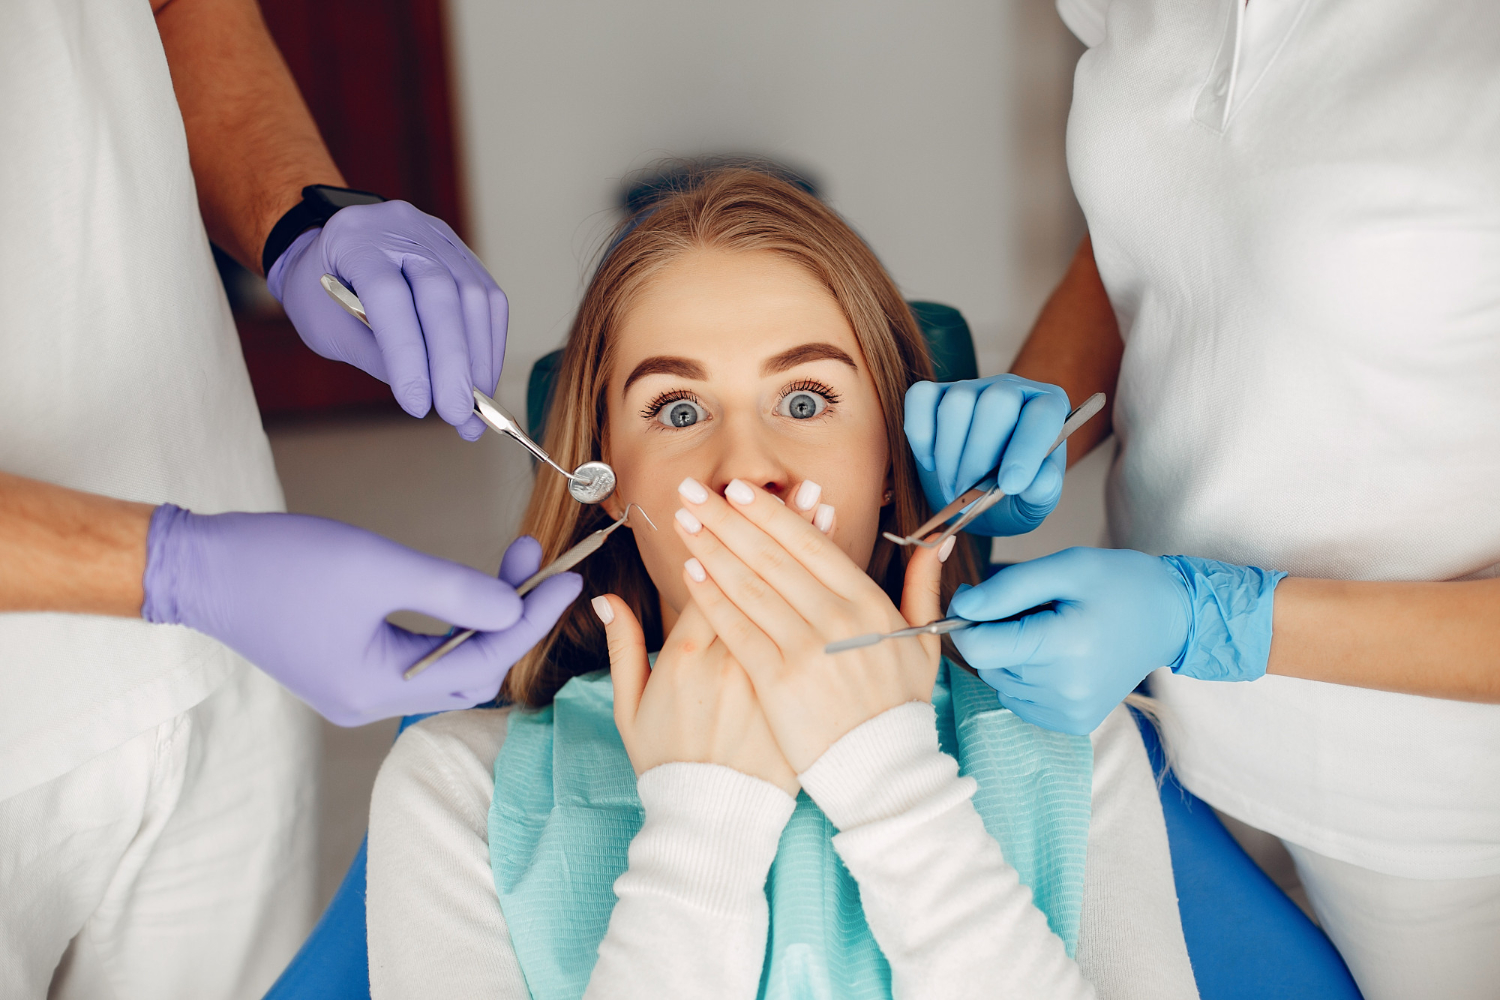 A young woman covers her mouth as dentists hold instruments to work on her teeth